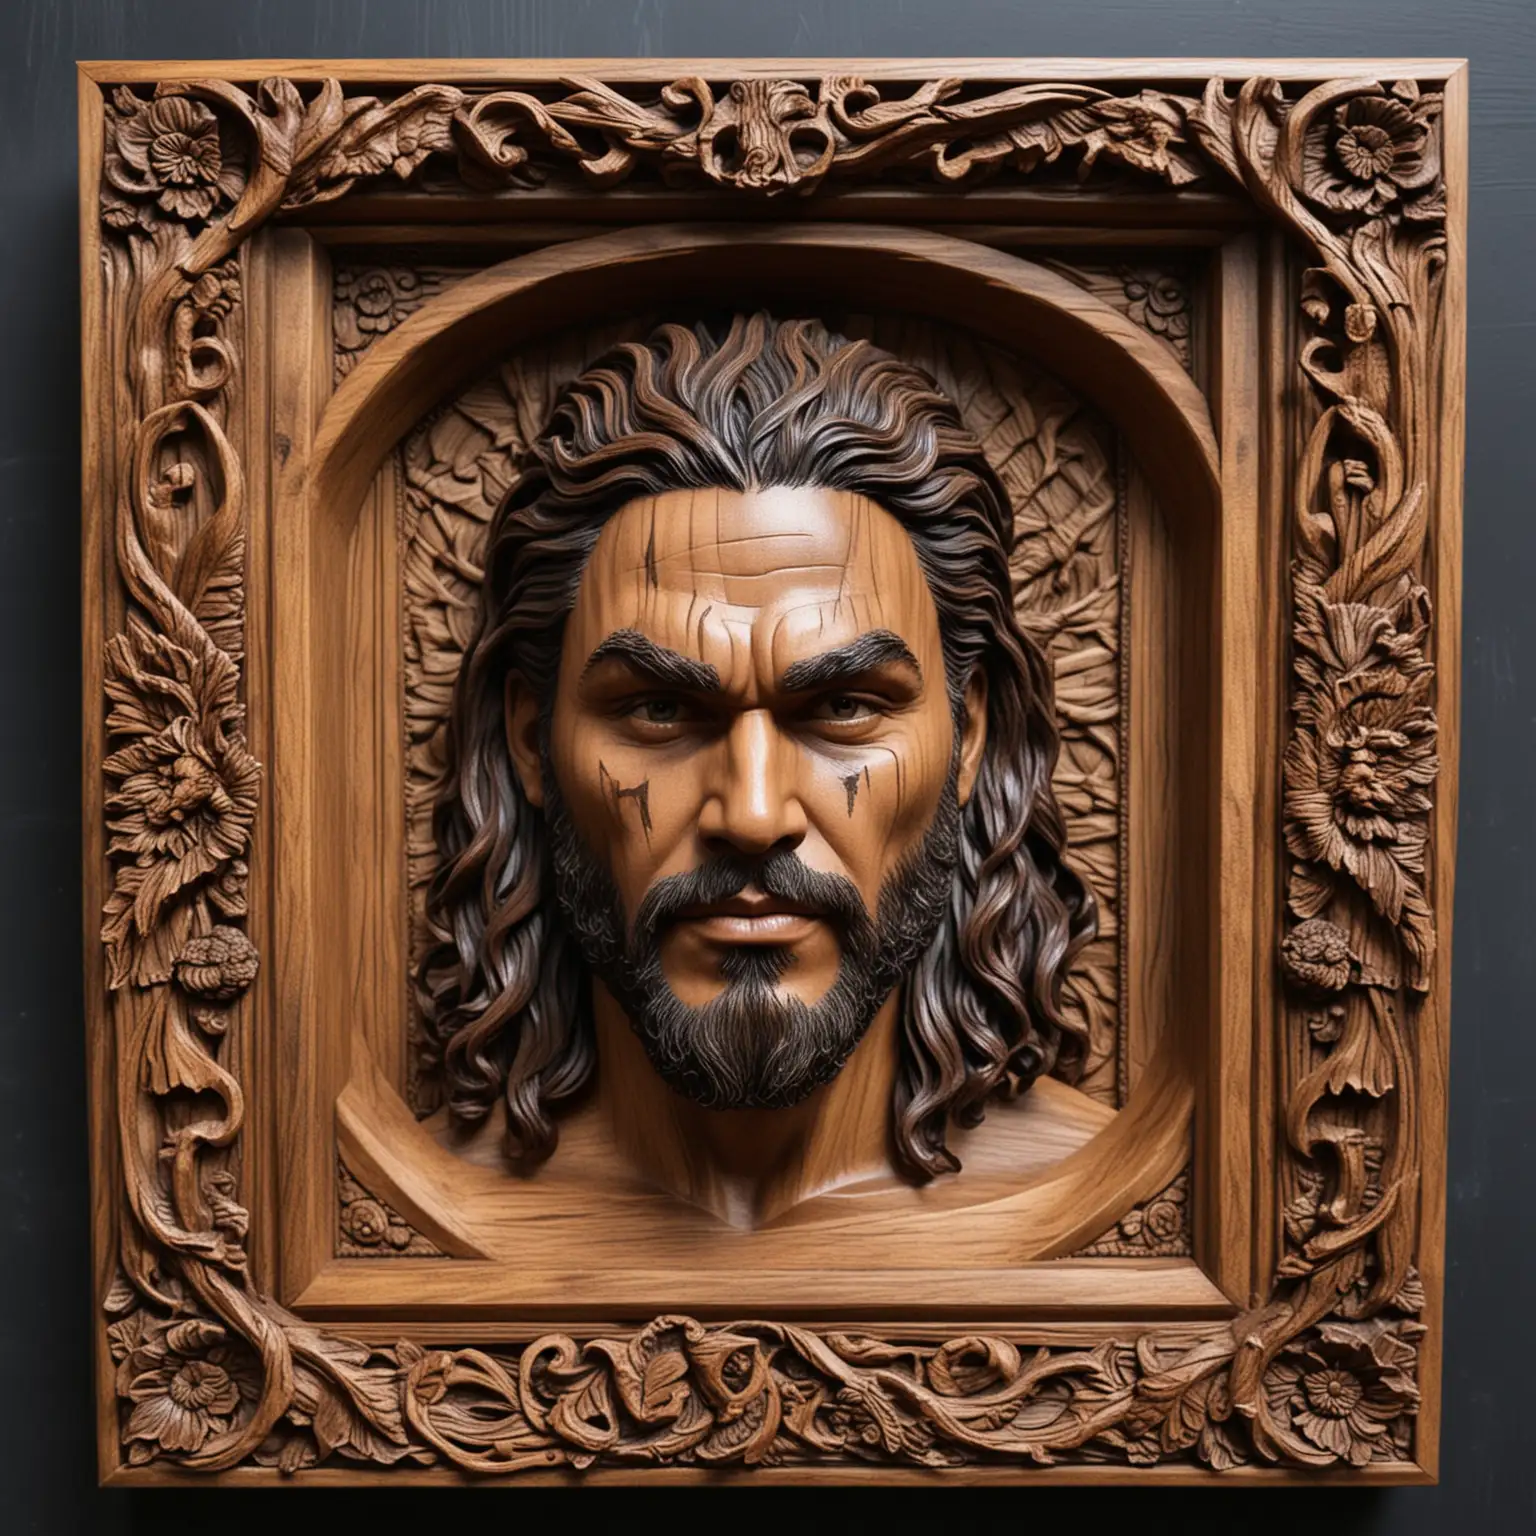 Jason Momoa in the style of agame of thrones in 3D wood carving and dark wood frame